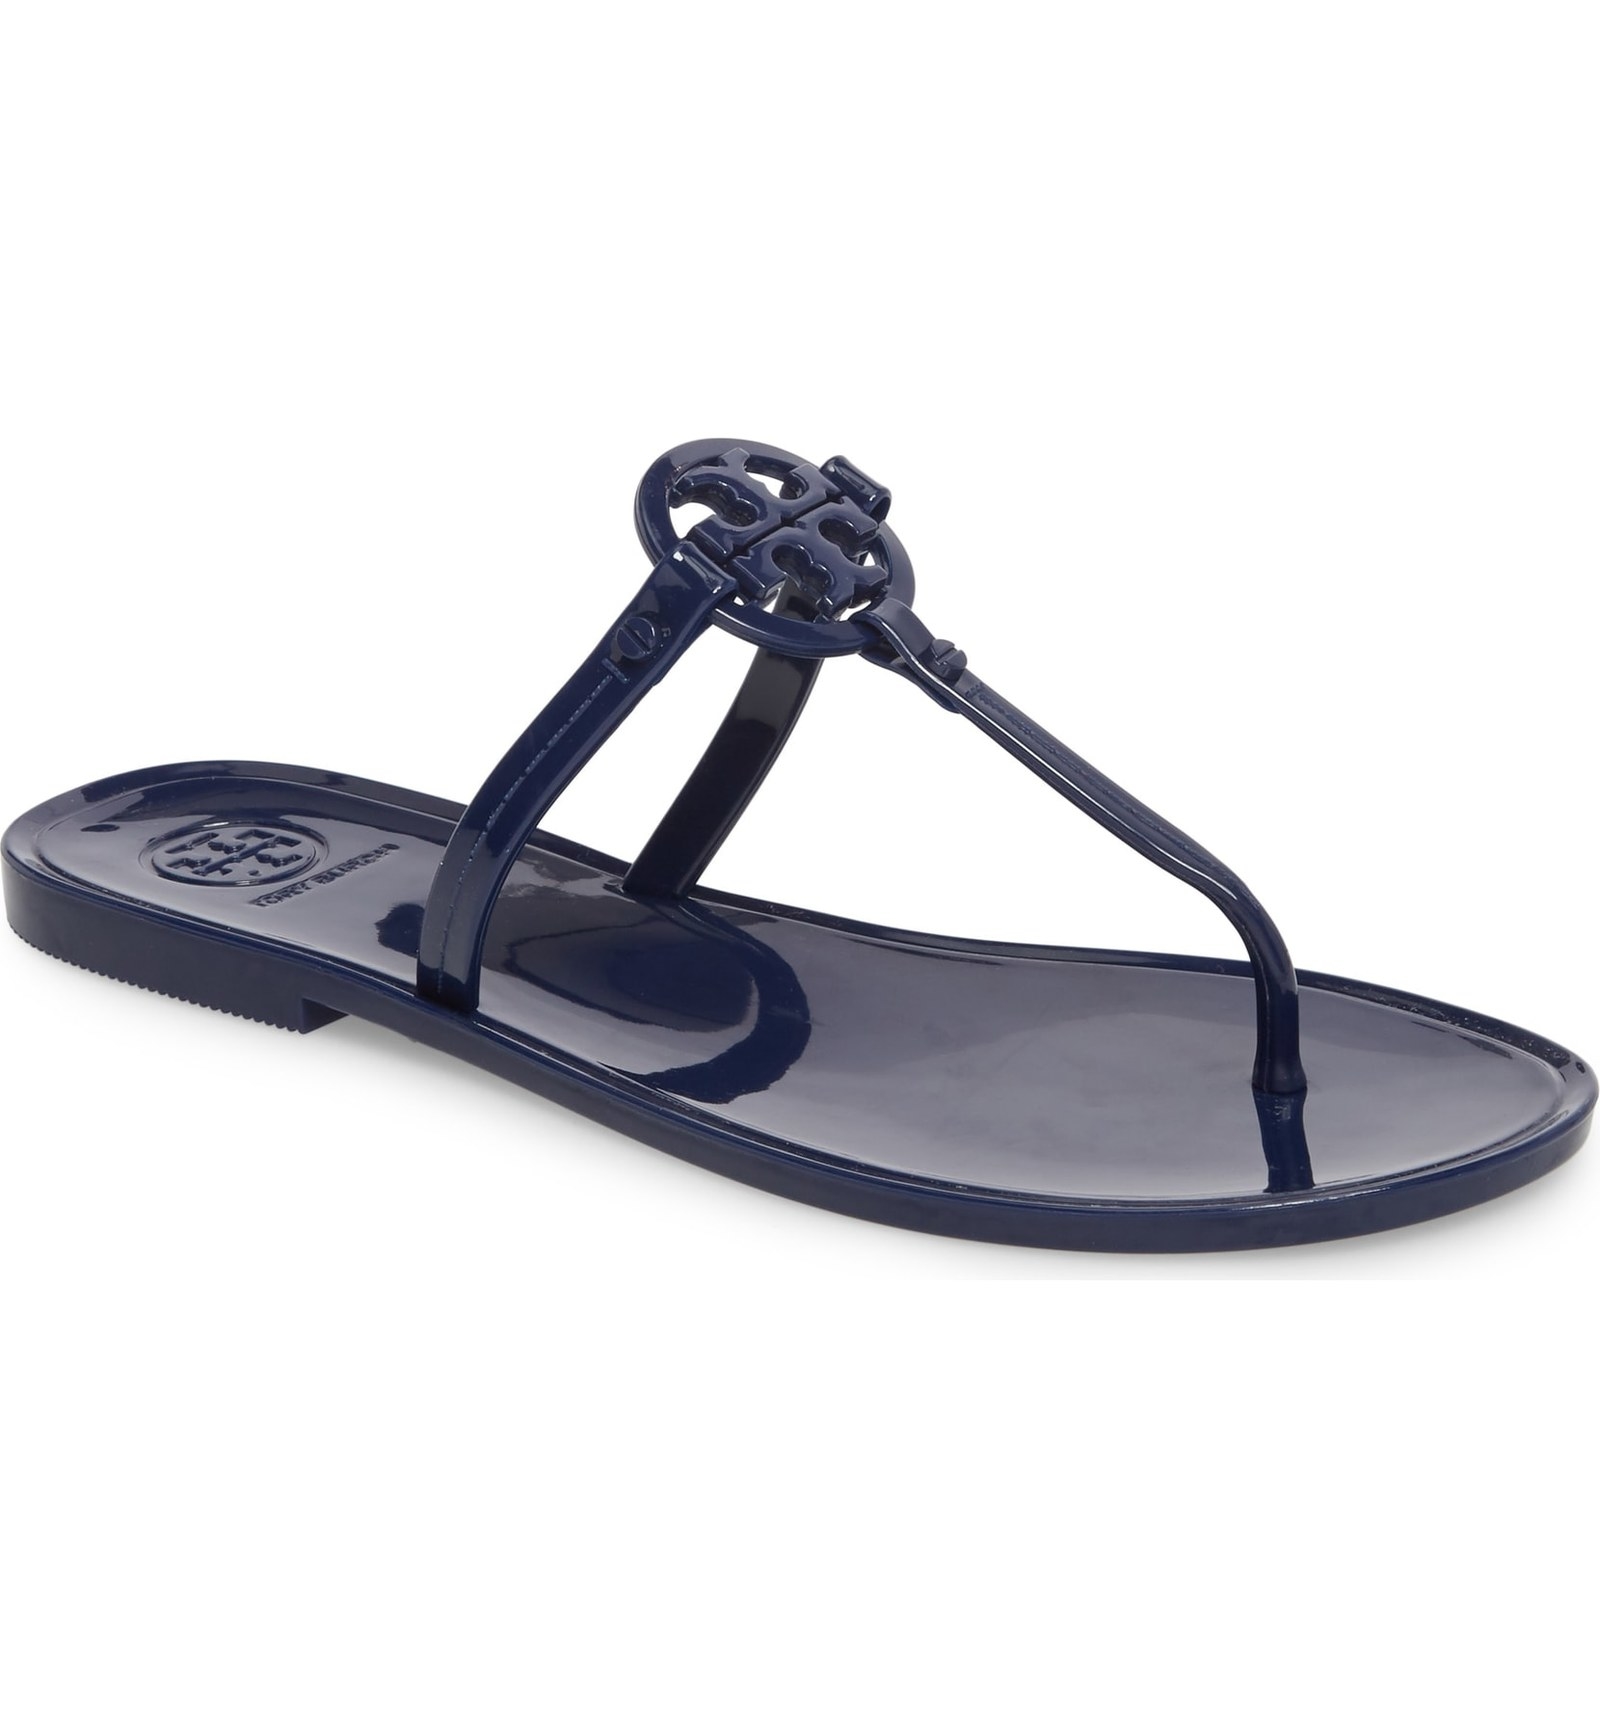 places to buy sandals near me